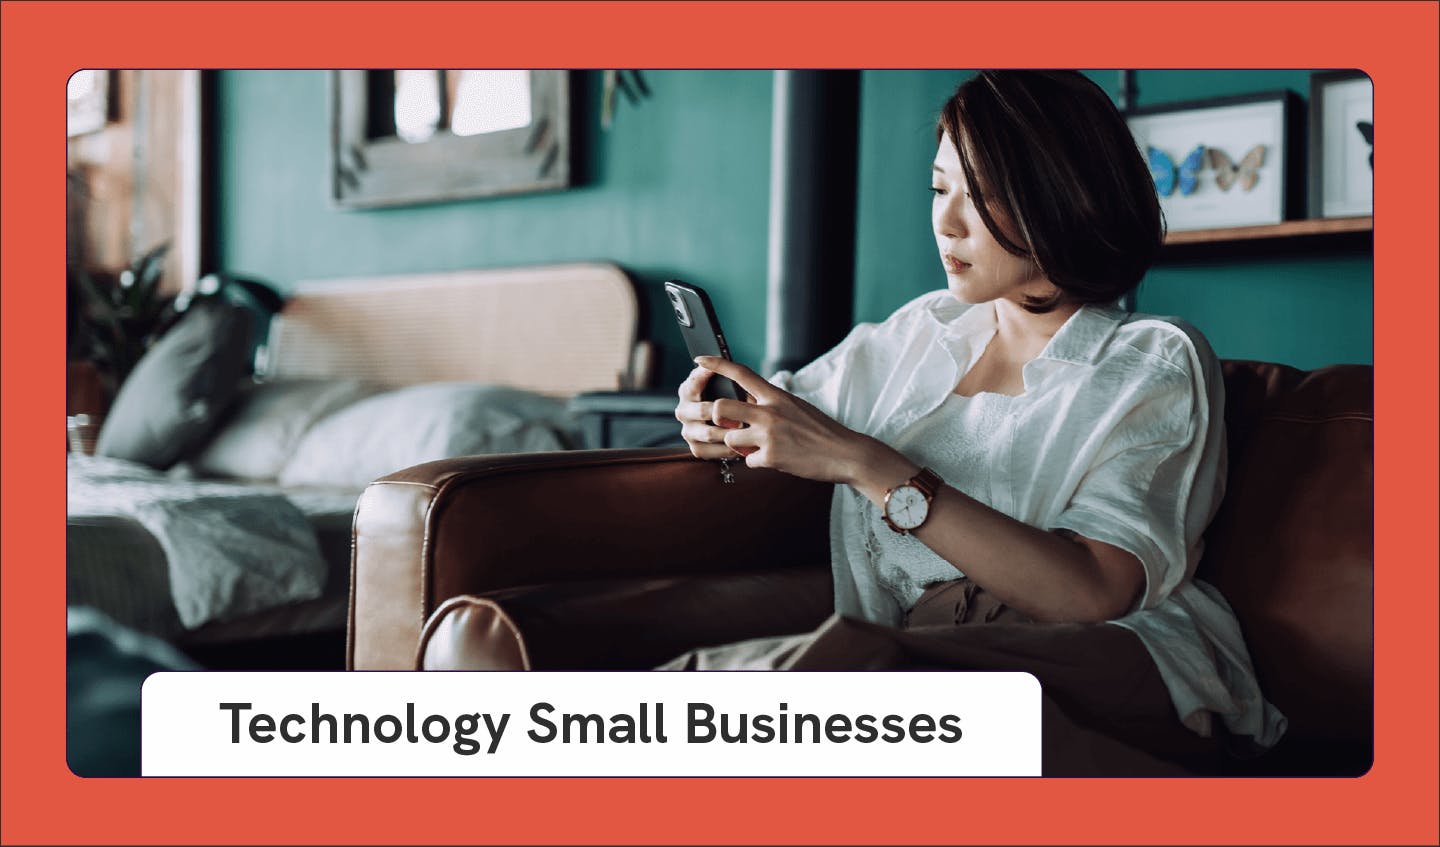 Photograph of a person using a smartphone as an example of a small business idea with text that says “Technology Small Businesses.”